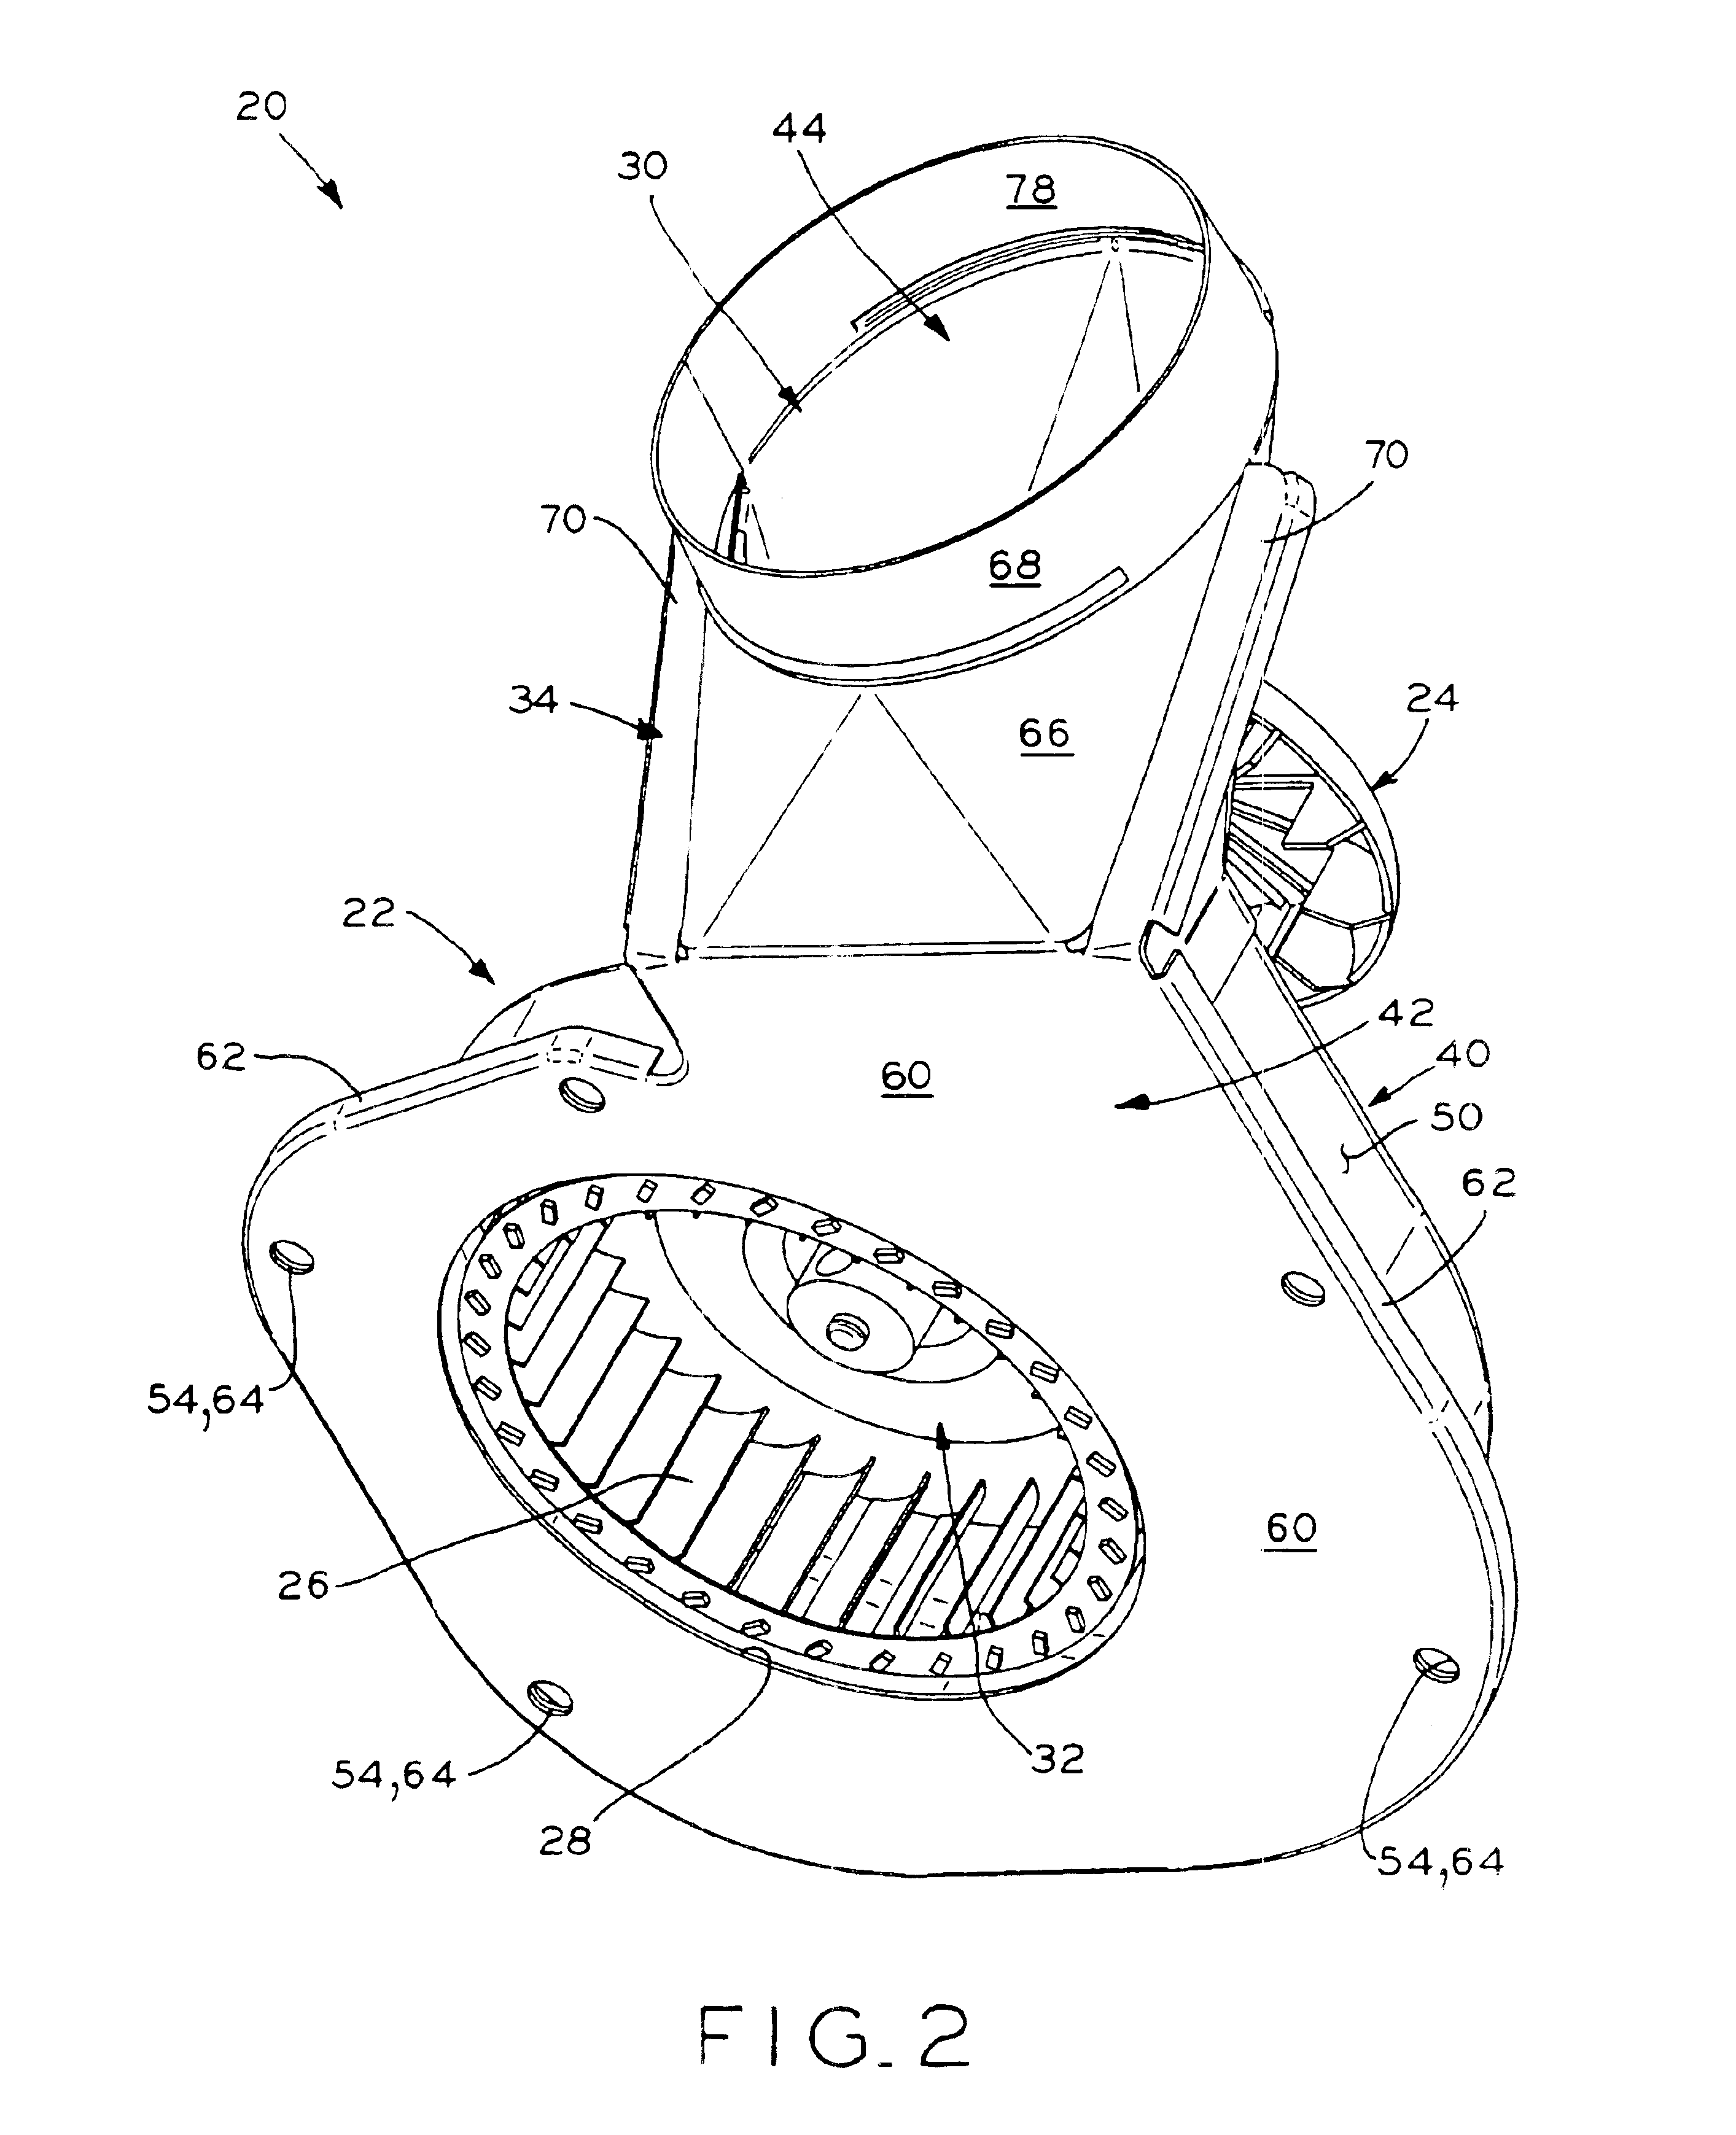 Blower housing for furnace blower assembly